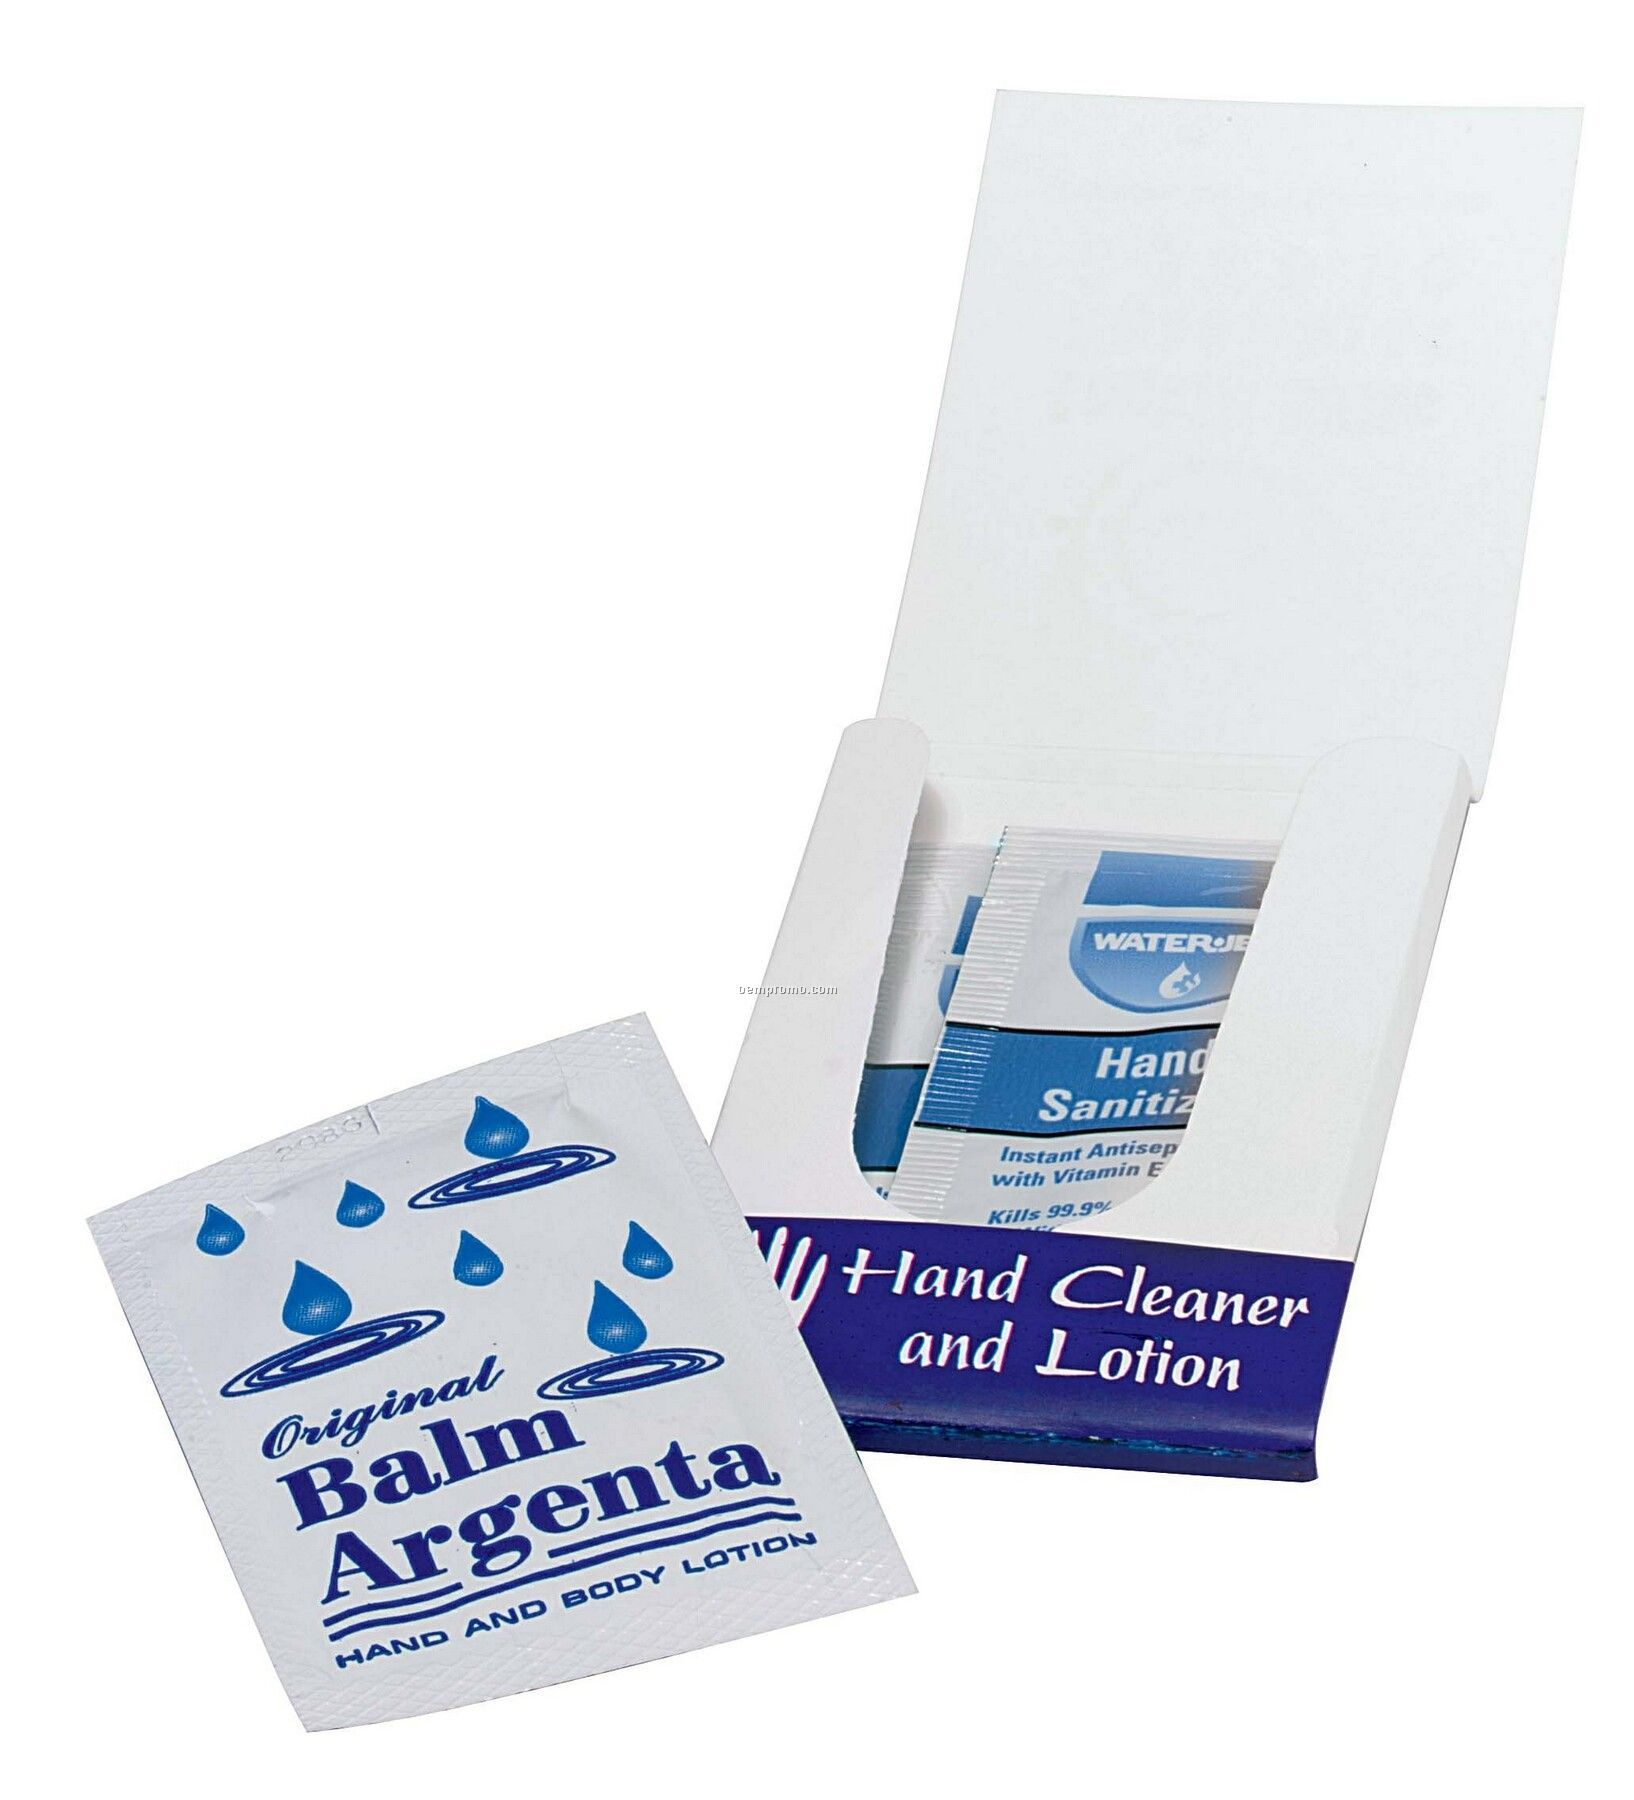 Pillowline Hand Cleaner & Lotion Pocket Pack